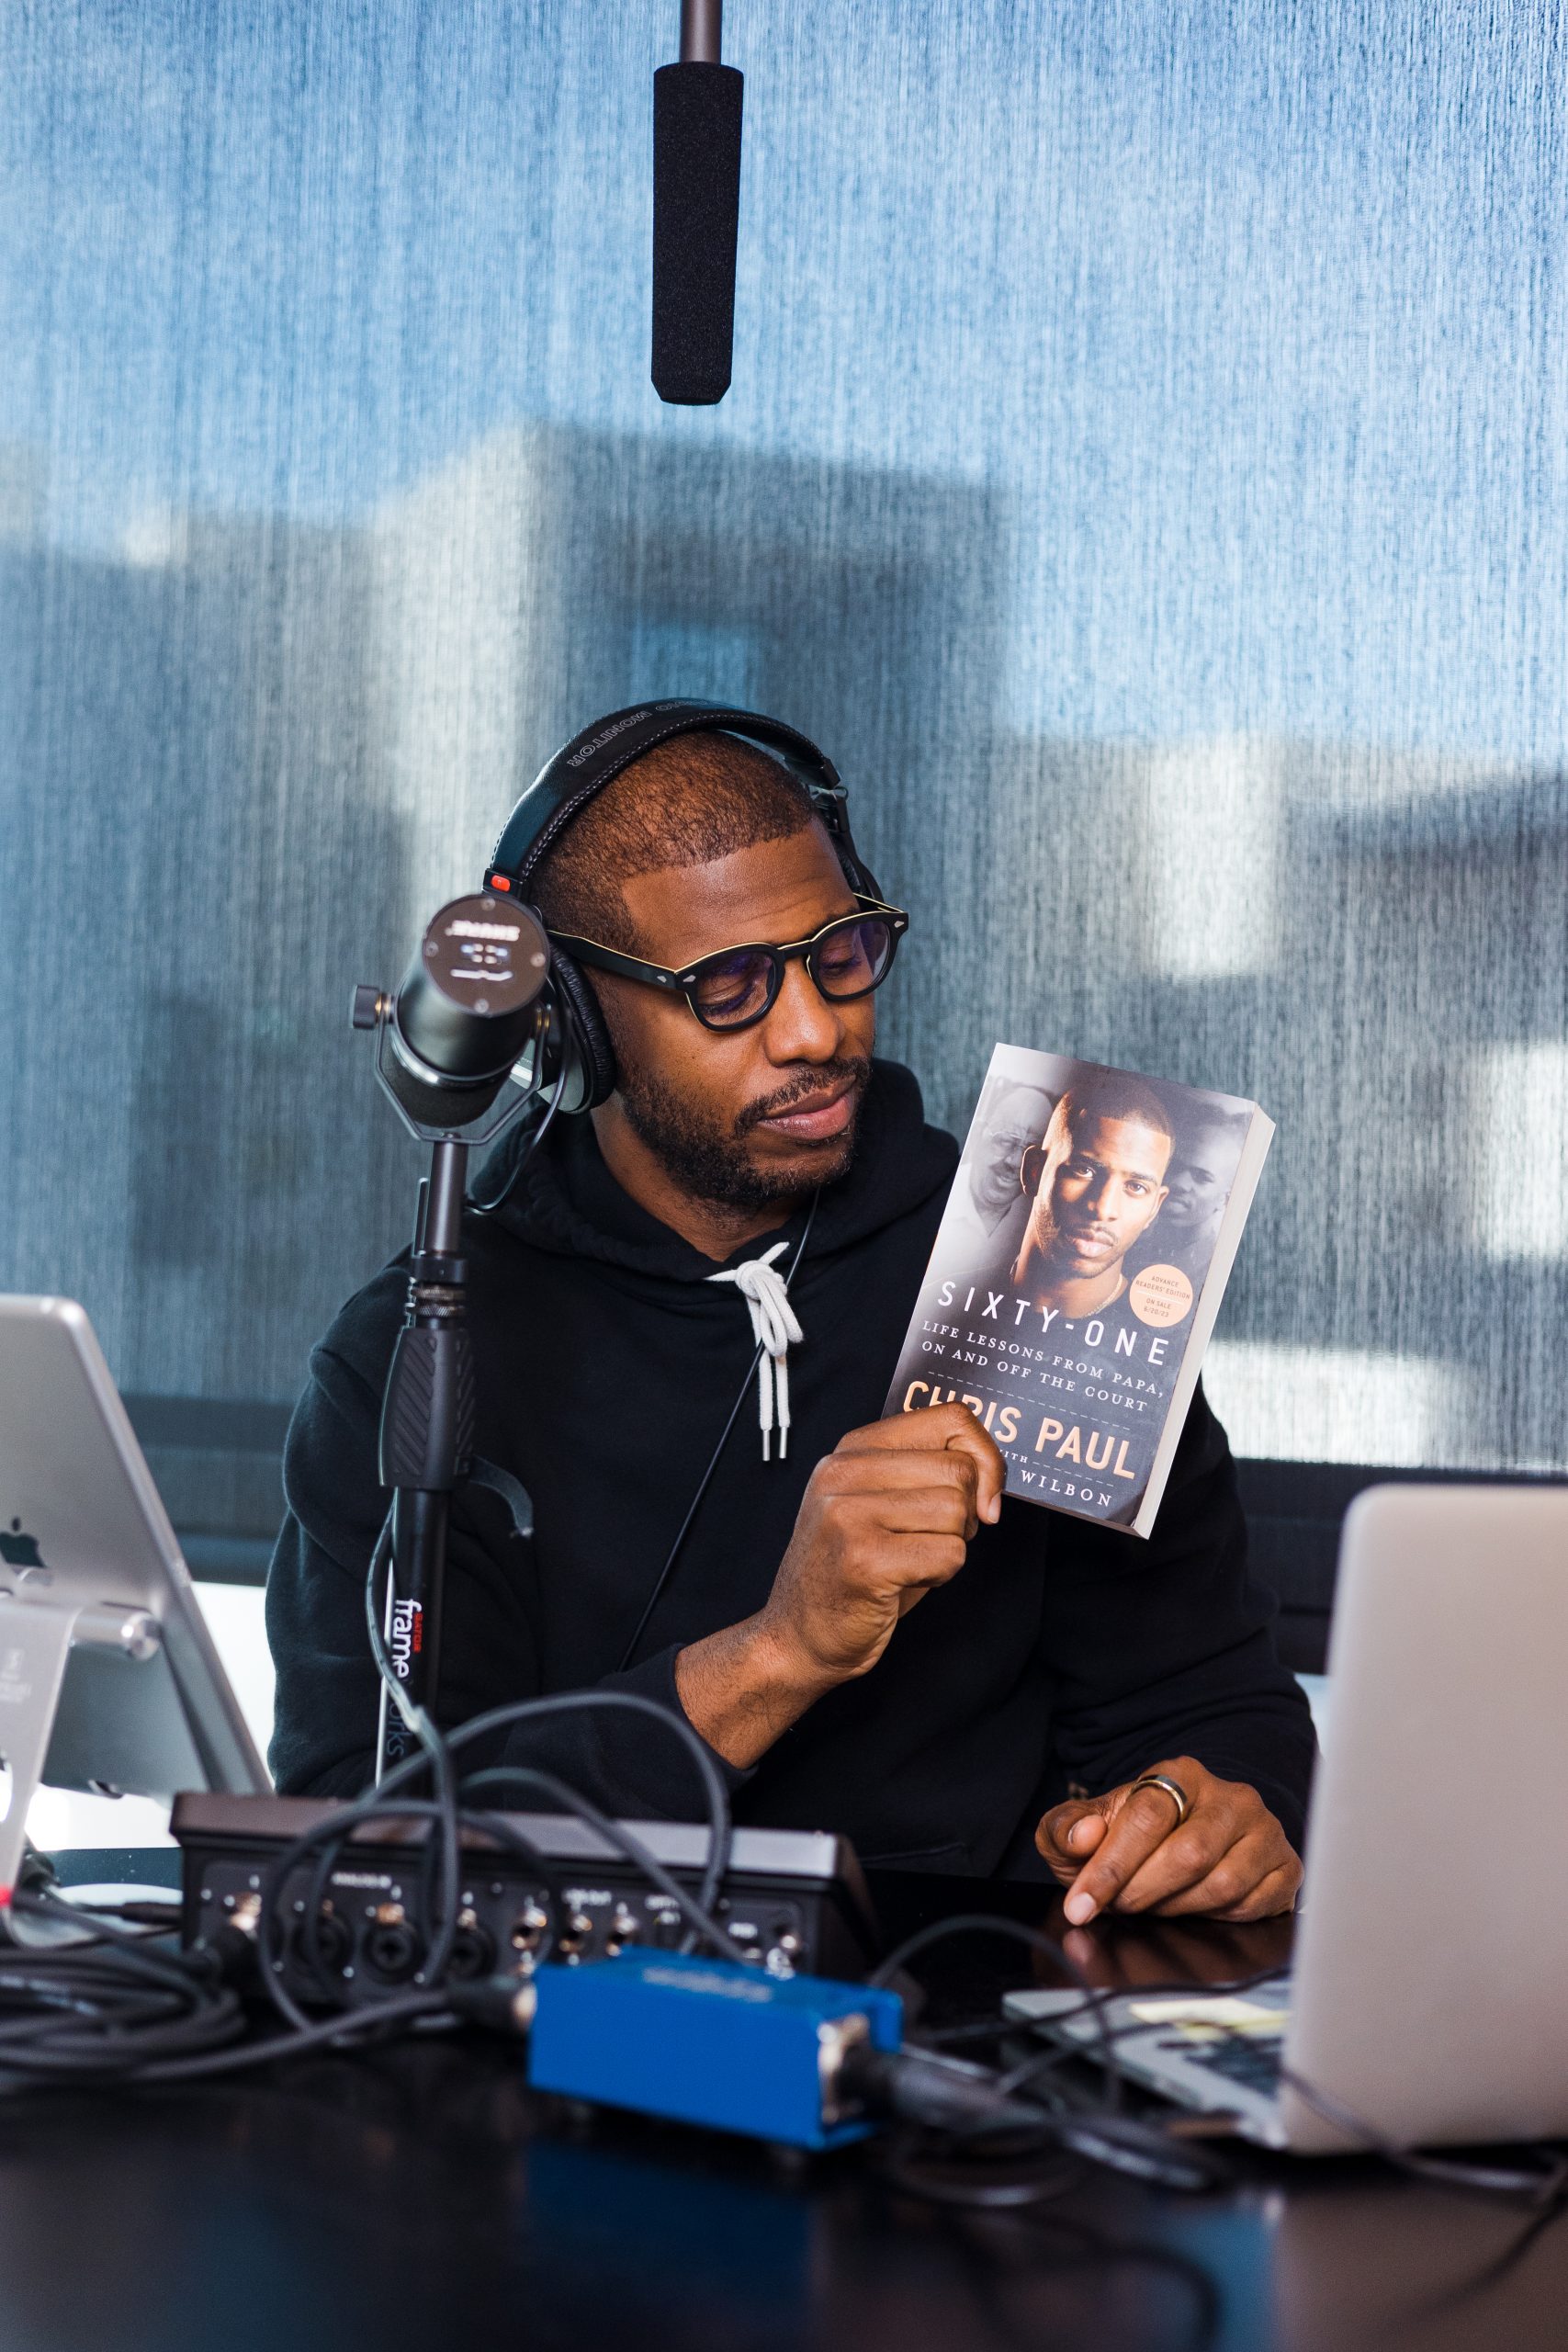 Chris Paul holding his new book